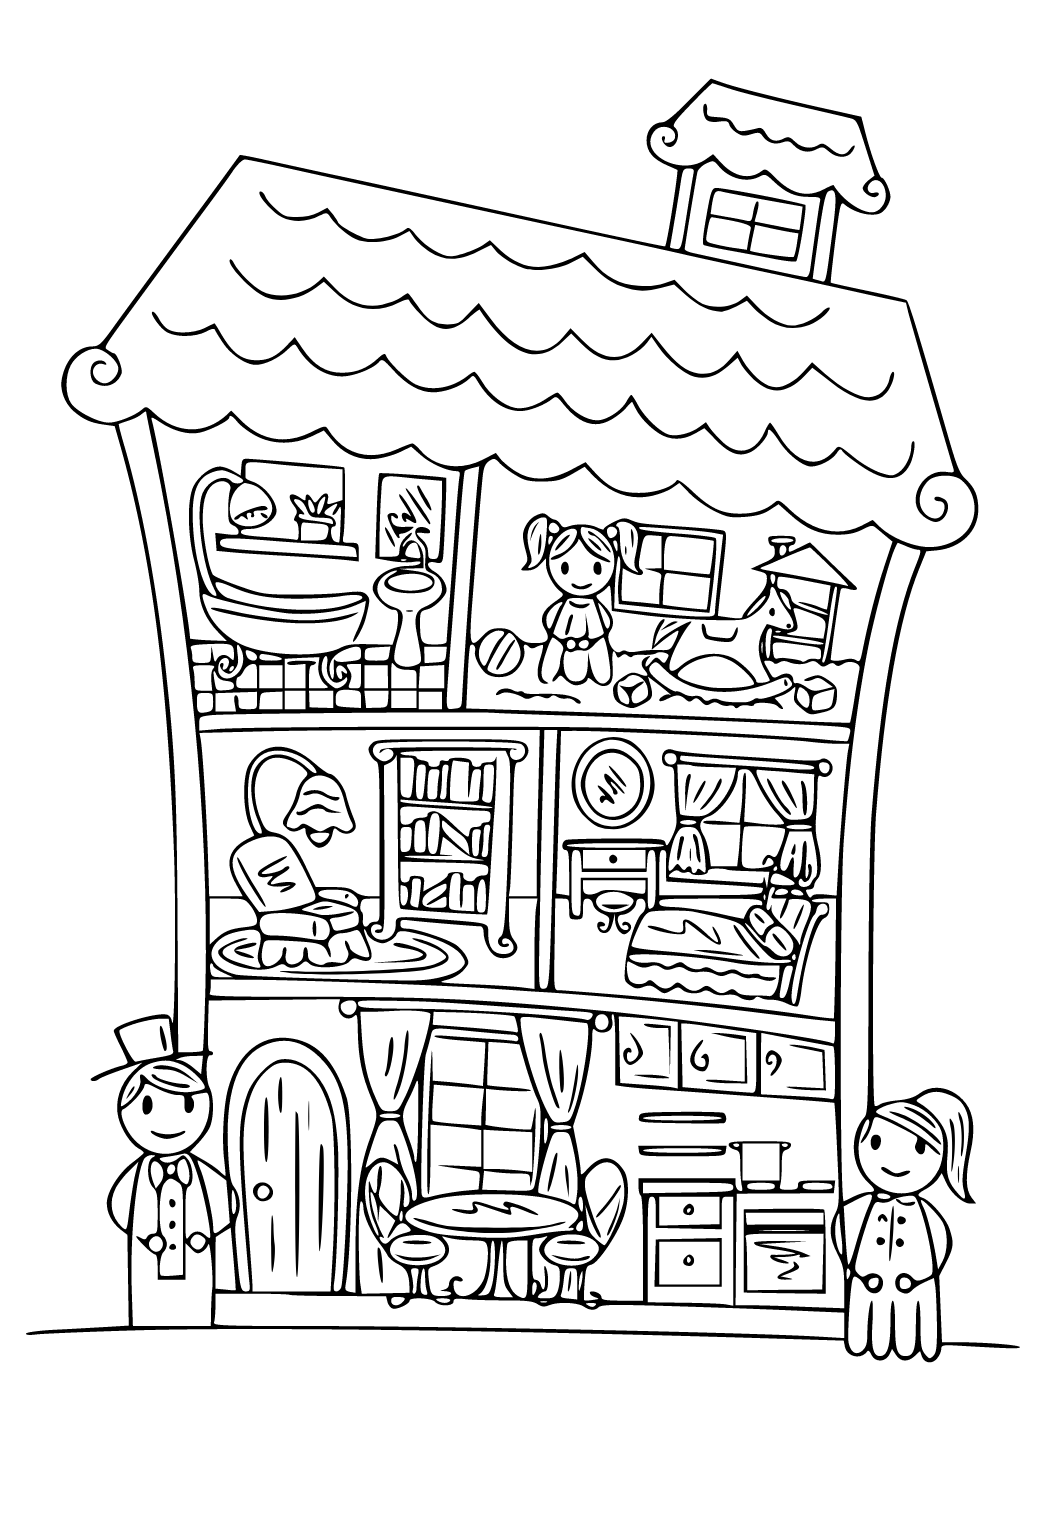 Free printable gabbys dollhouse characters coloring page for adults and kids